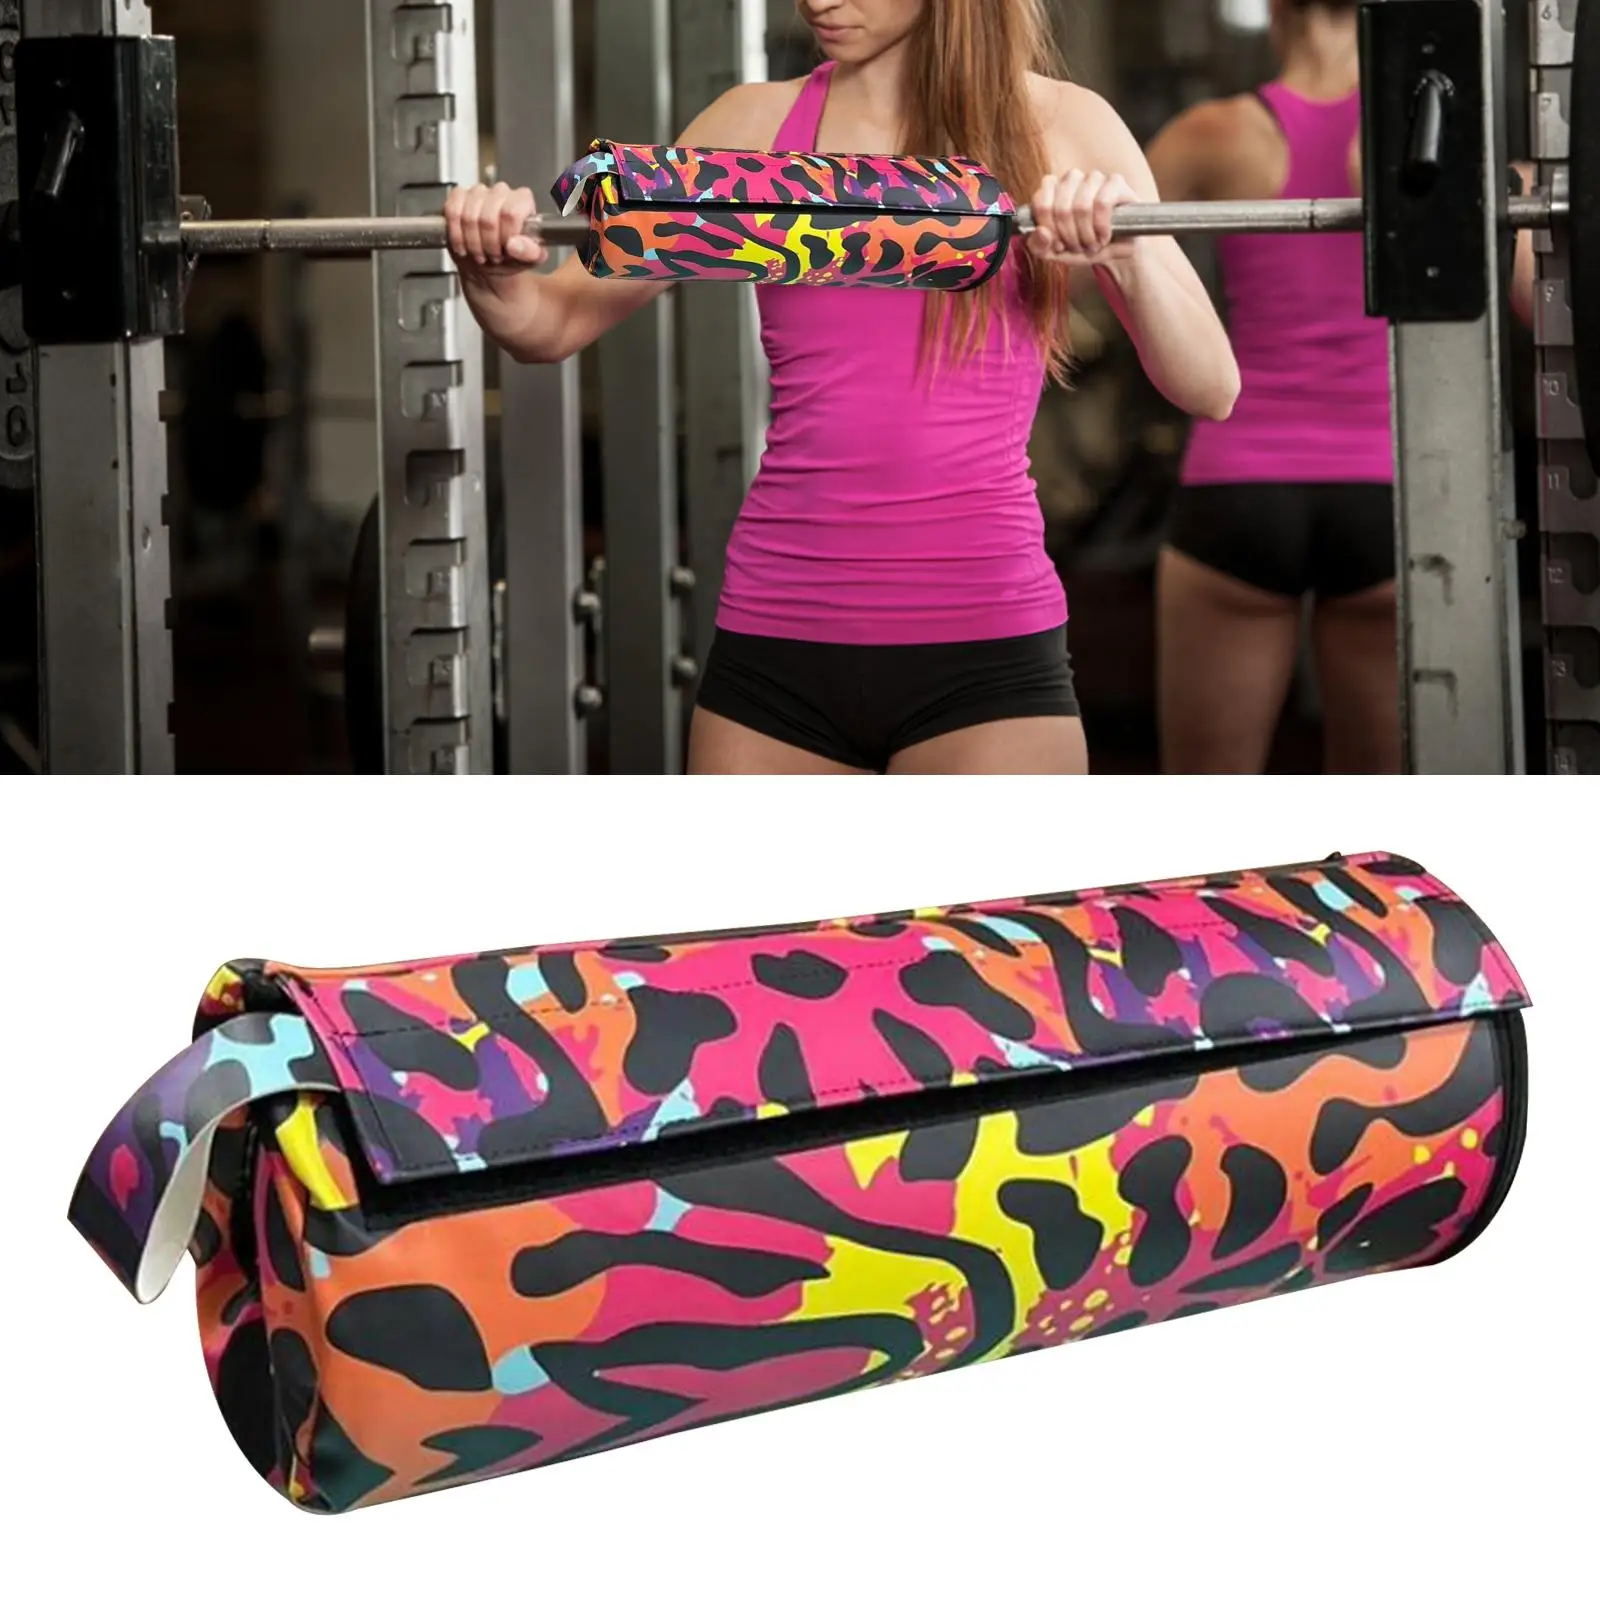 Barbell Squat Pad Lunges Hip Thrust Training Barbell Covers Foam Bar Pad